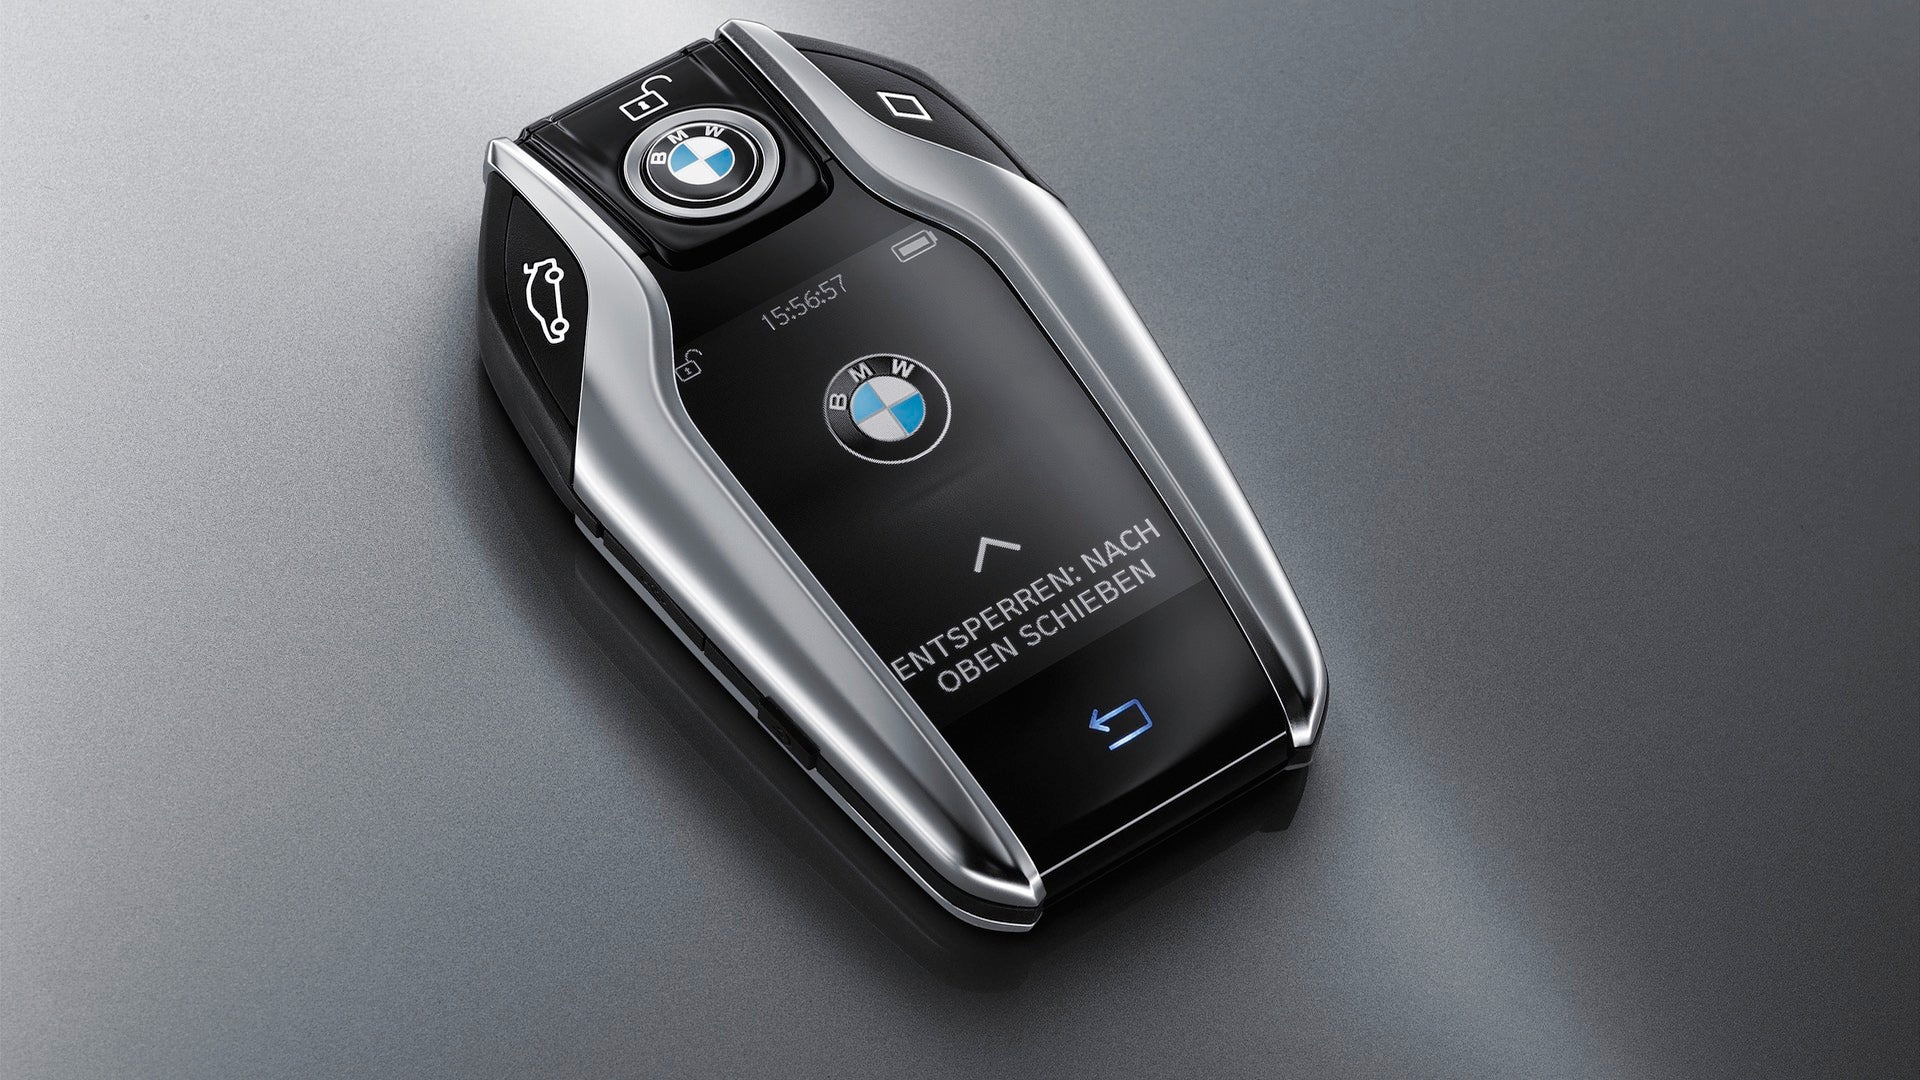 BMW Predicts the End of Car Keys, Believes Smartphones Will Take Over